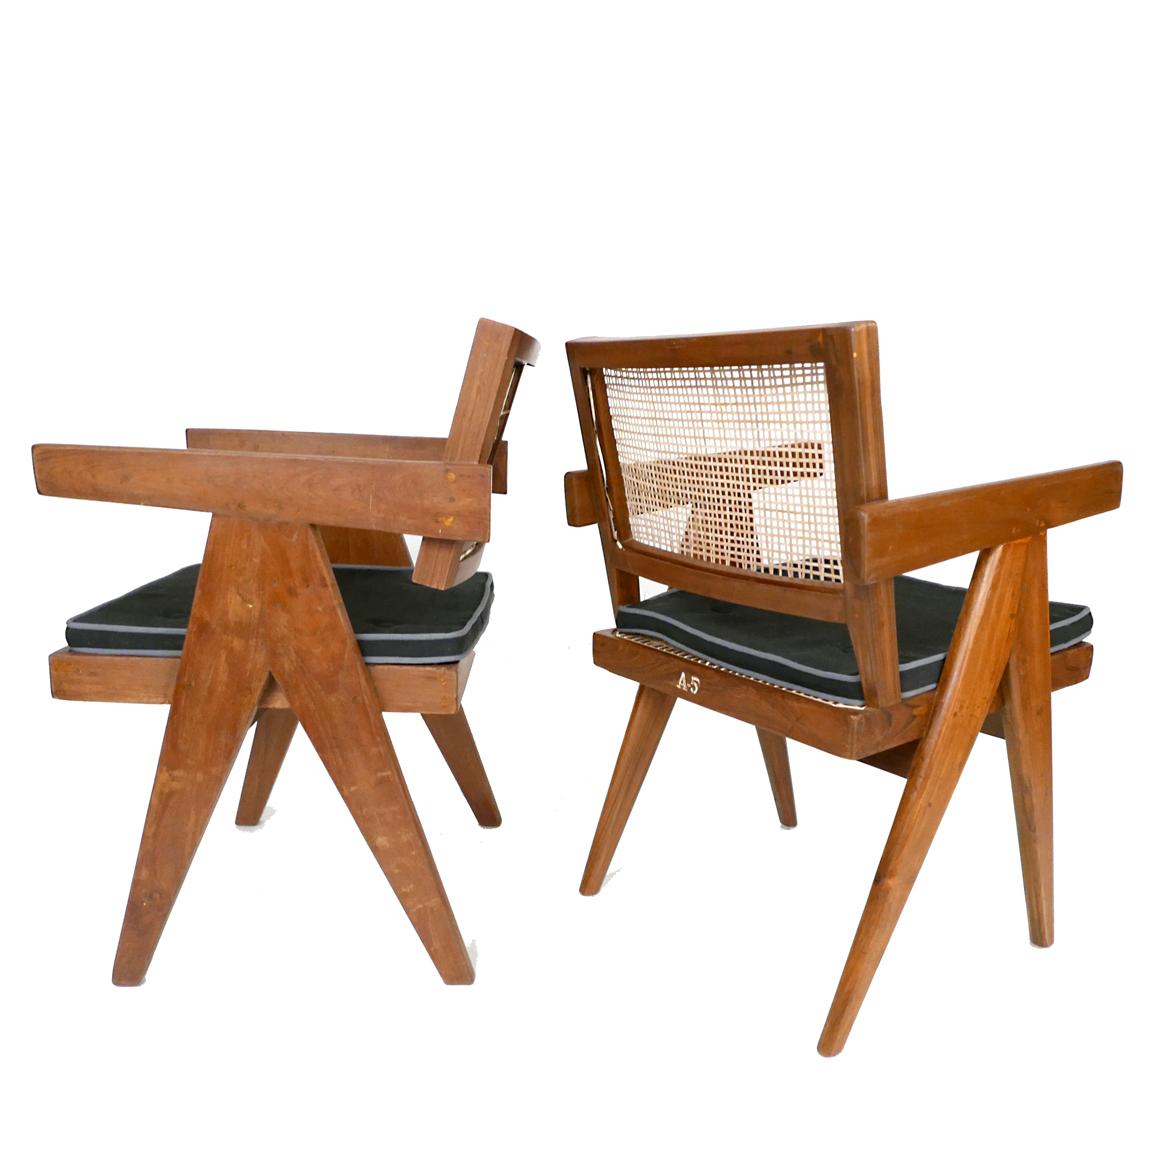 Rare set of 6 Pierre Jeanneret armchairs, model PJ-SI-28-B, France/ India. Teak, cane, upholstery. 1953. Provenance: Punjab University, then Important Private New York Collection. Literature: Le Corbusier Pierre Jeanneret, The Indian Adventure,